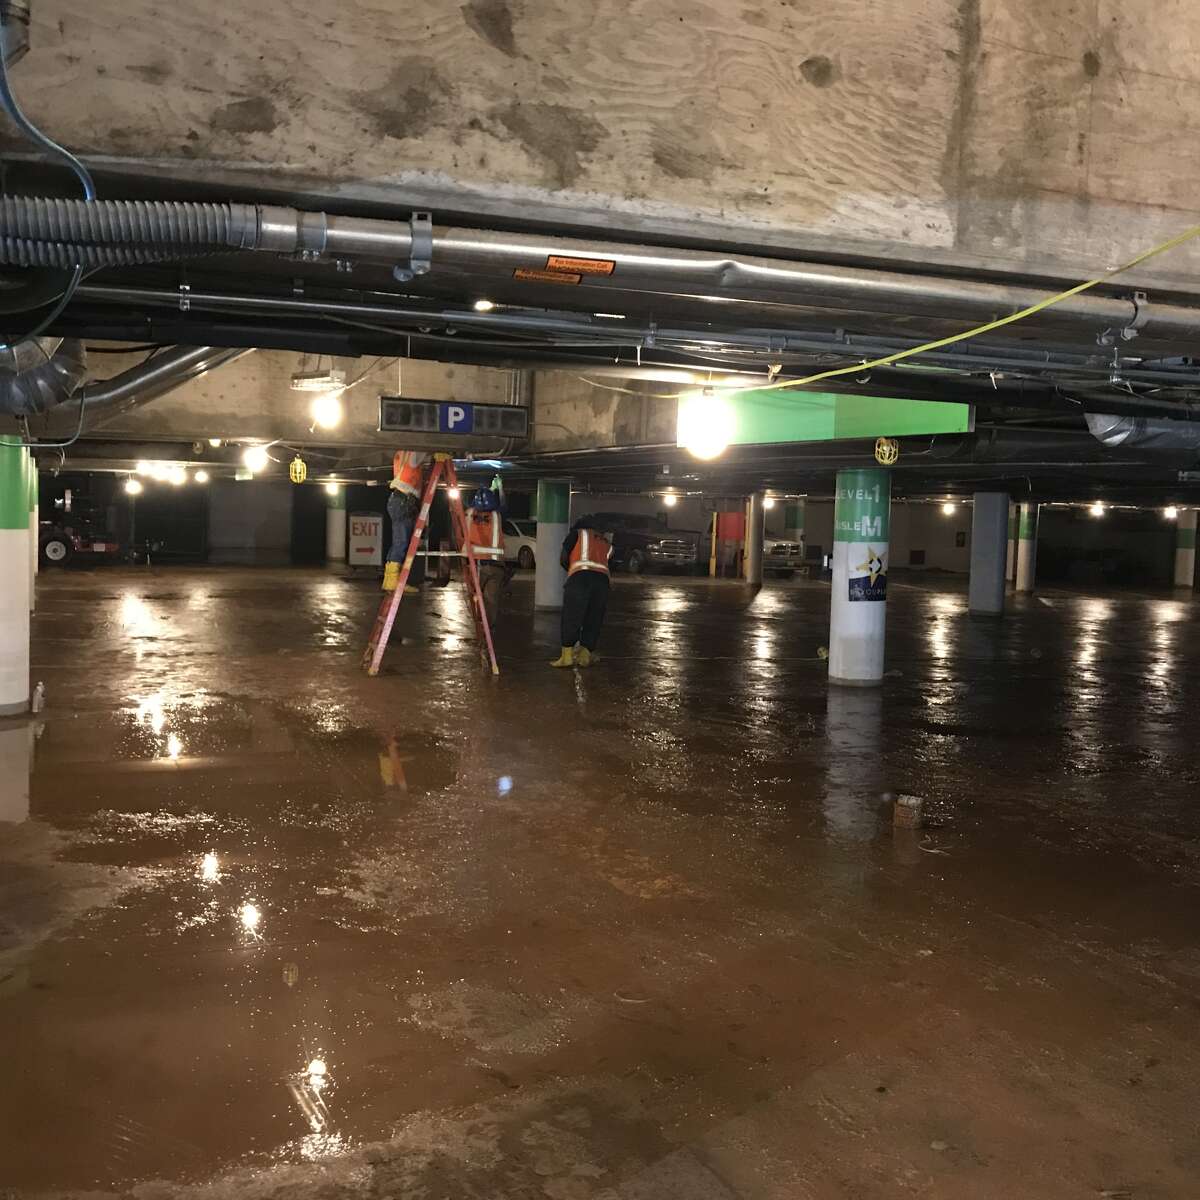 Recovery efforts are underway in Houston's Theater District parking garage.